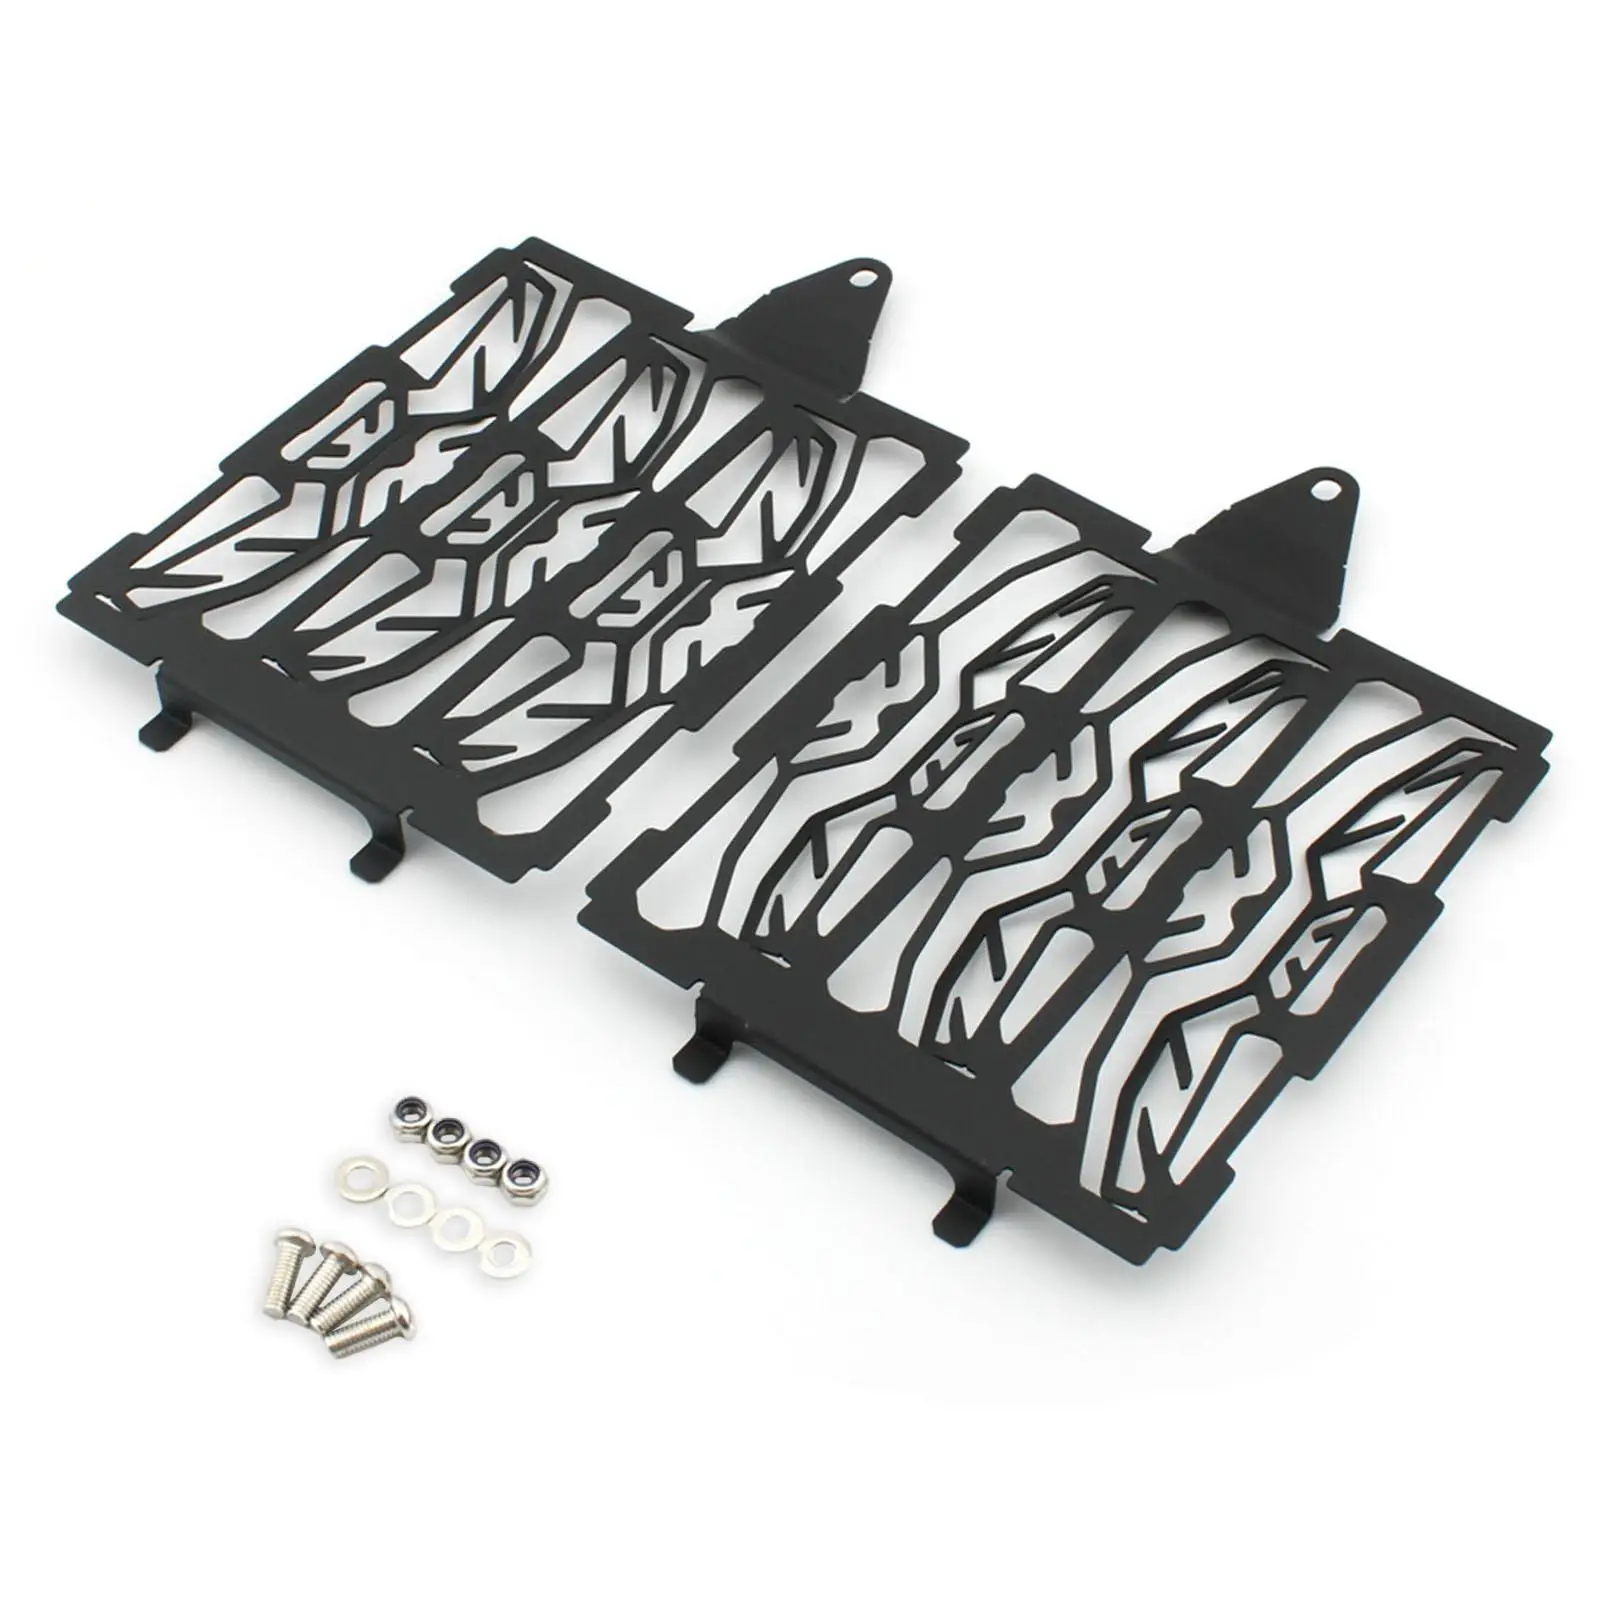 

Motorcycle Heat Sink Grille Guard Stable Performance Professional Heat Sink Protector for R1300GS Adv Direct Replacement